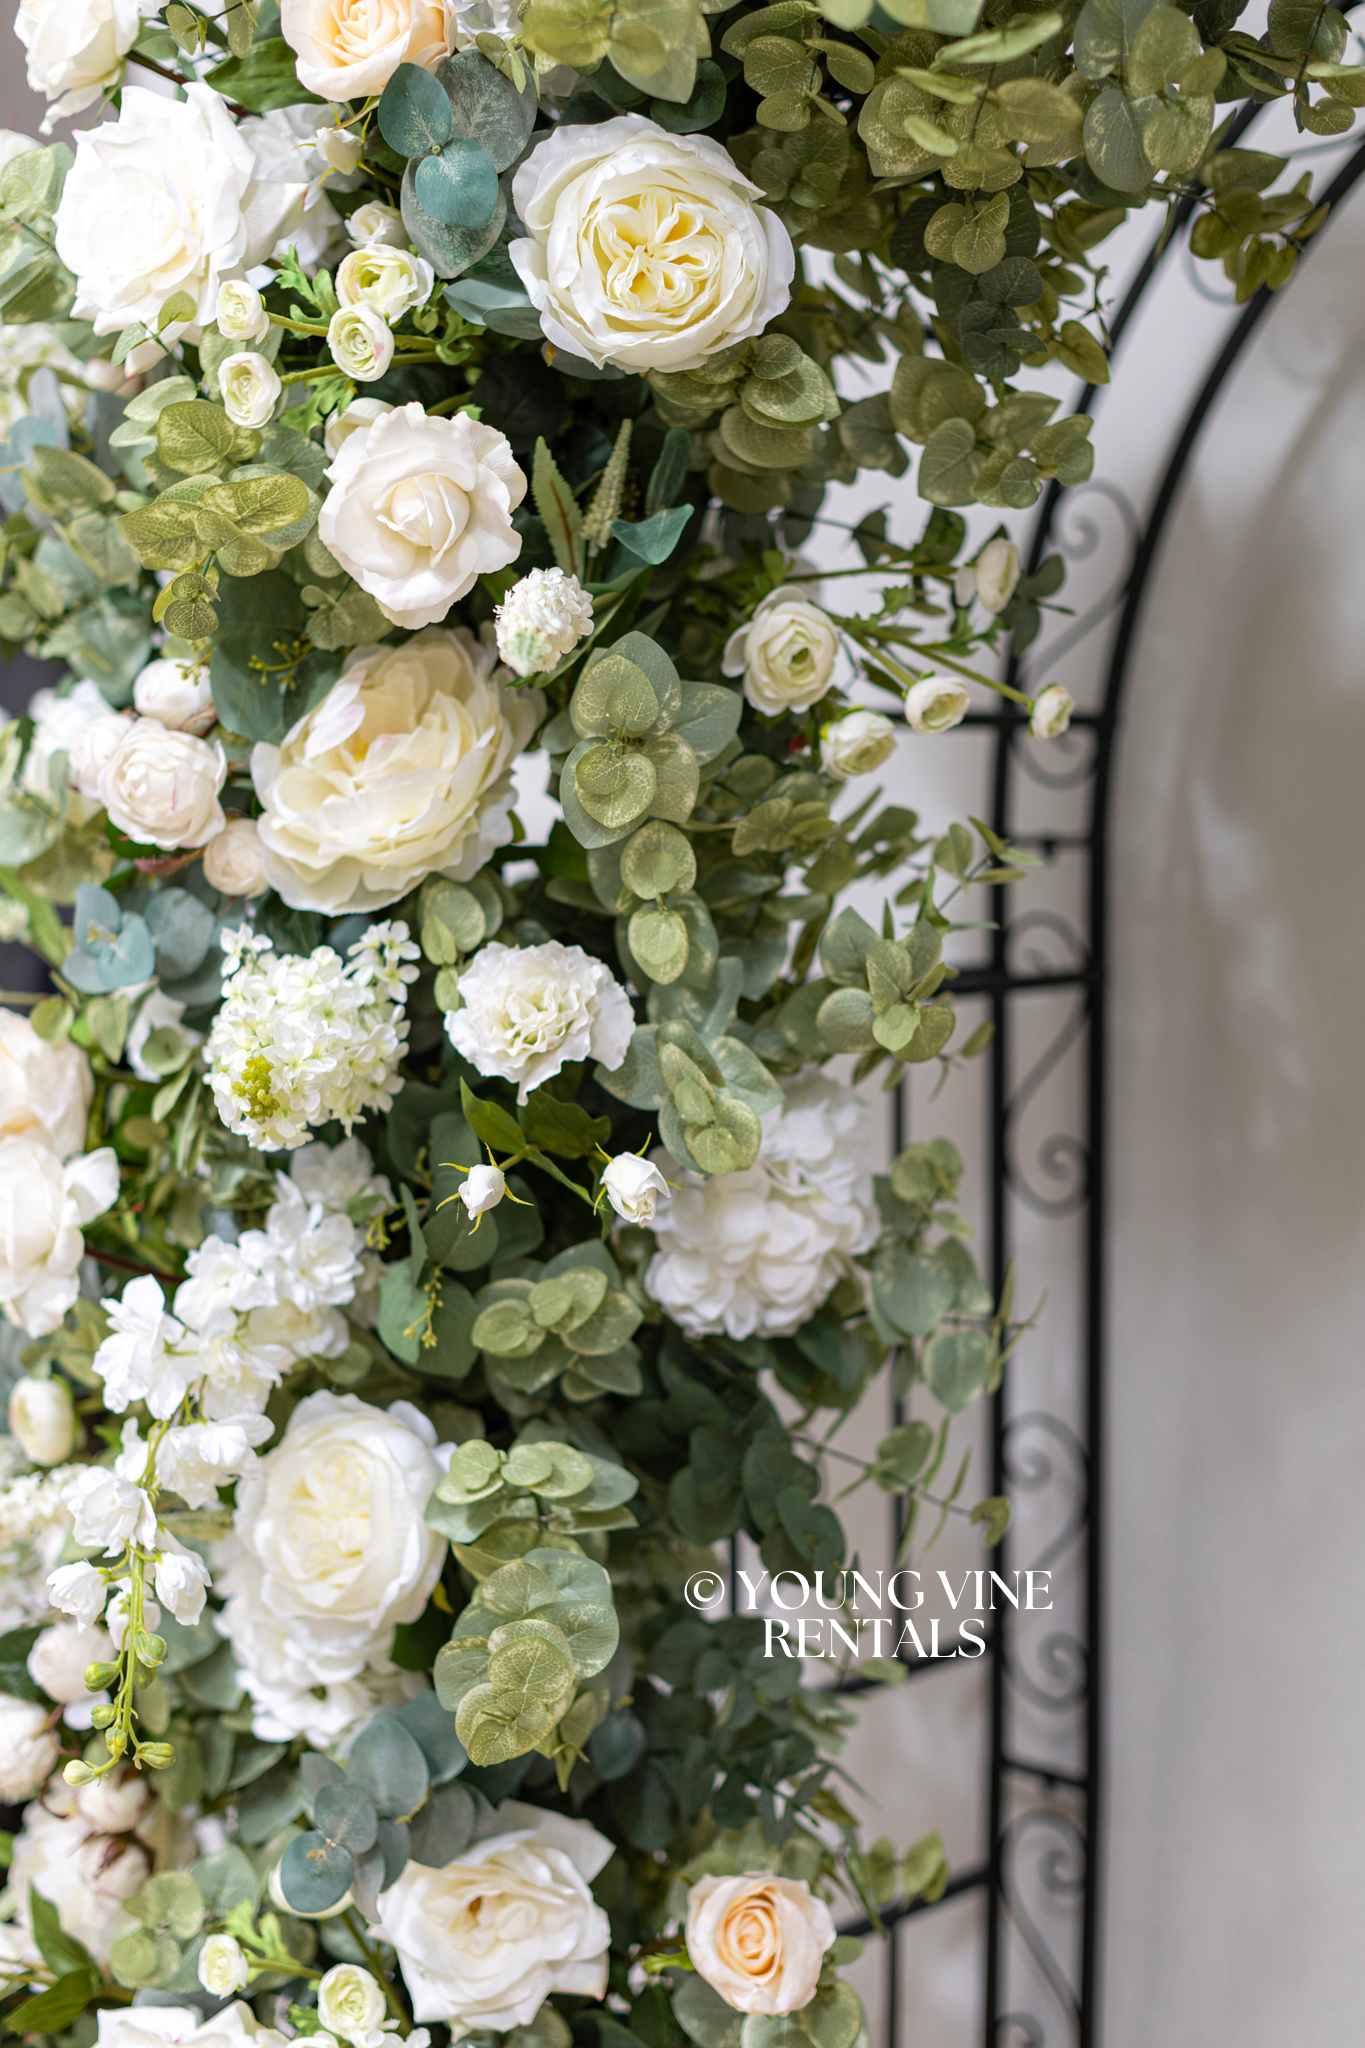 Close-up detail shot of lush, romantic wedding floral arbor studded with an abundance of ivory and white flowers and various types of eucalyptus foliage, styled on a black filigree arch frame.